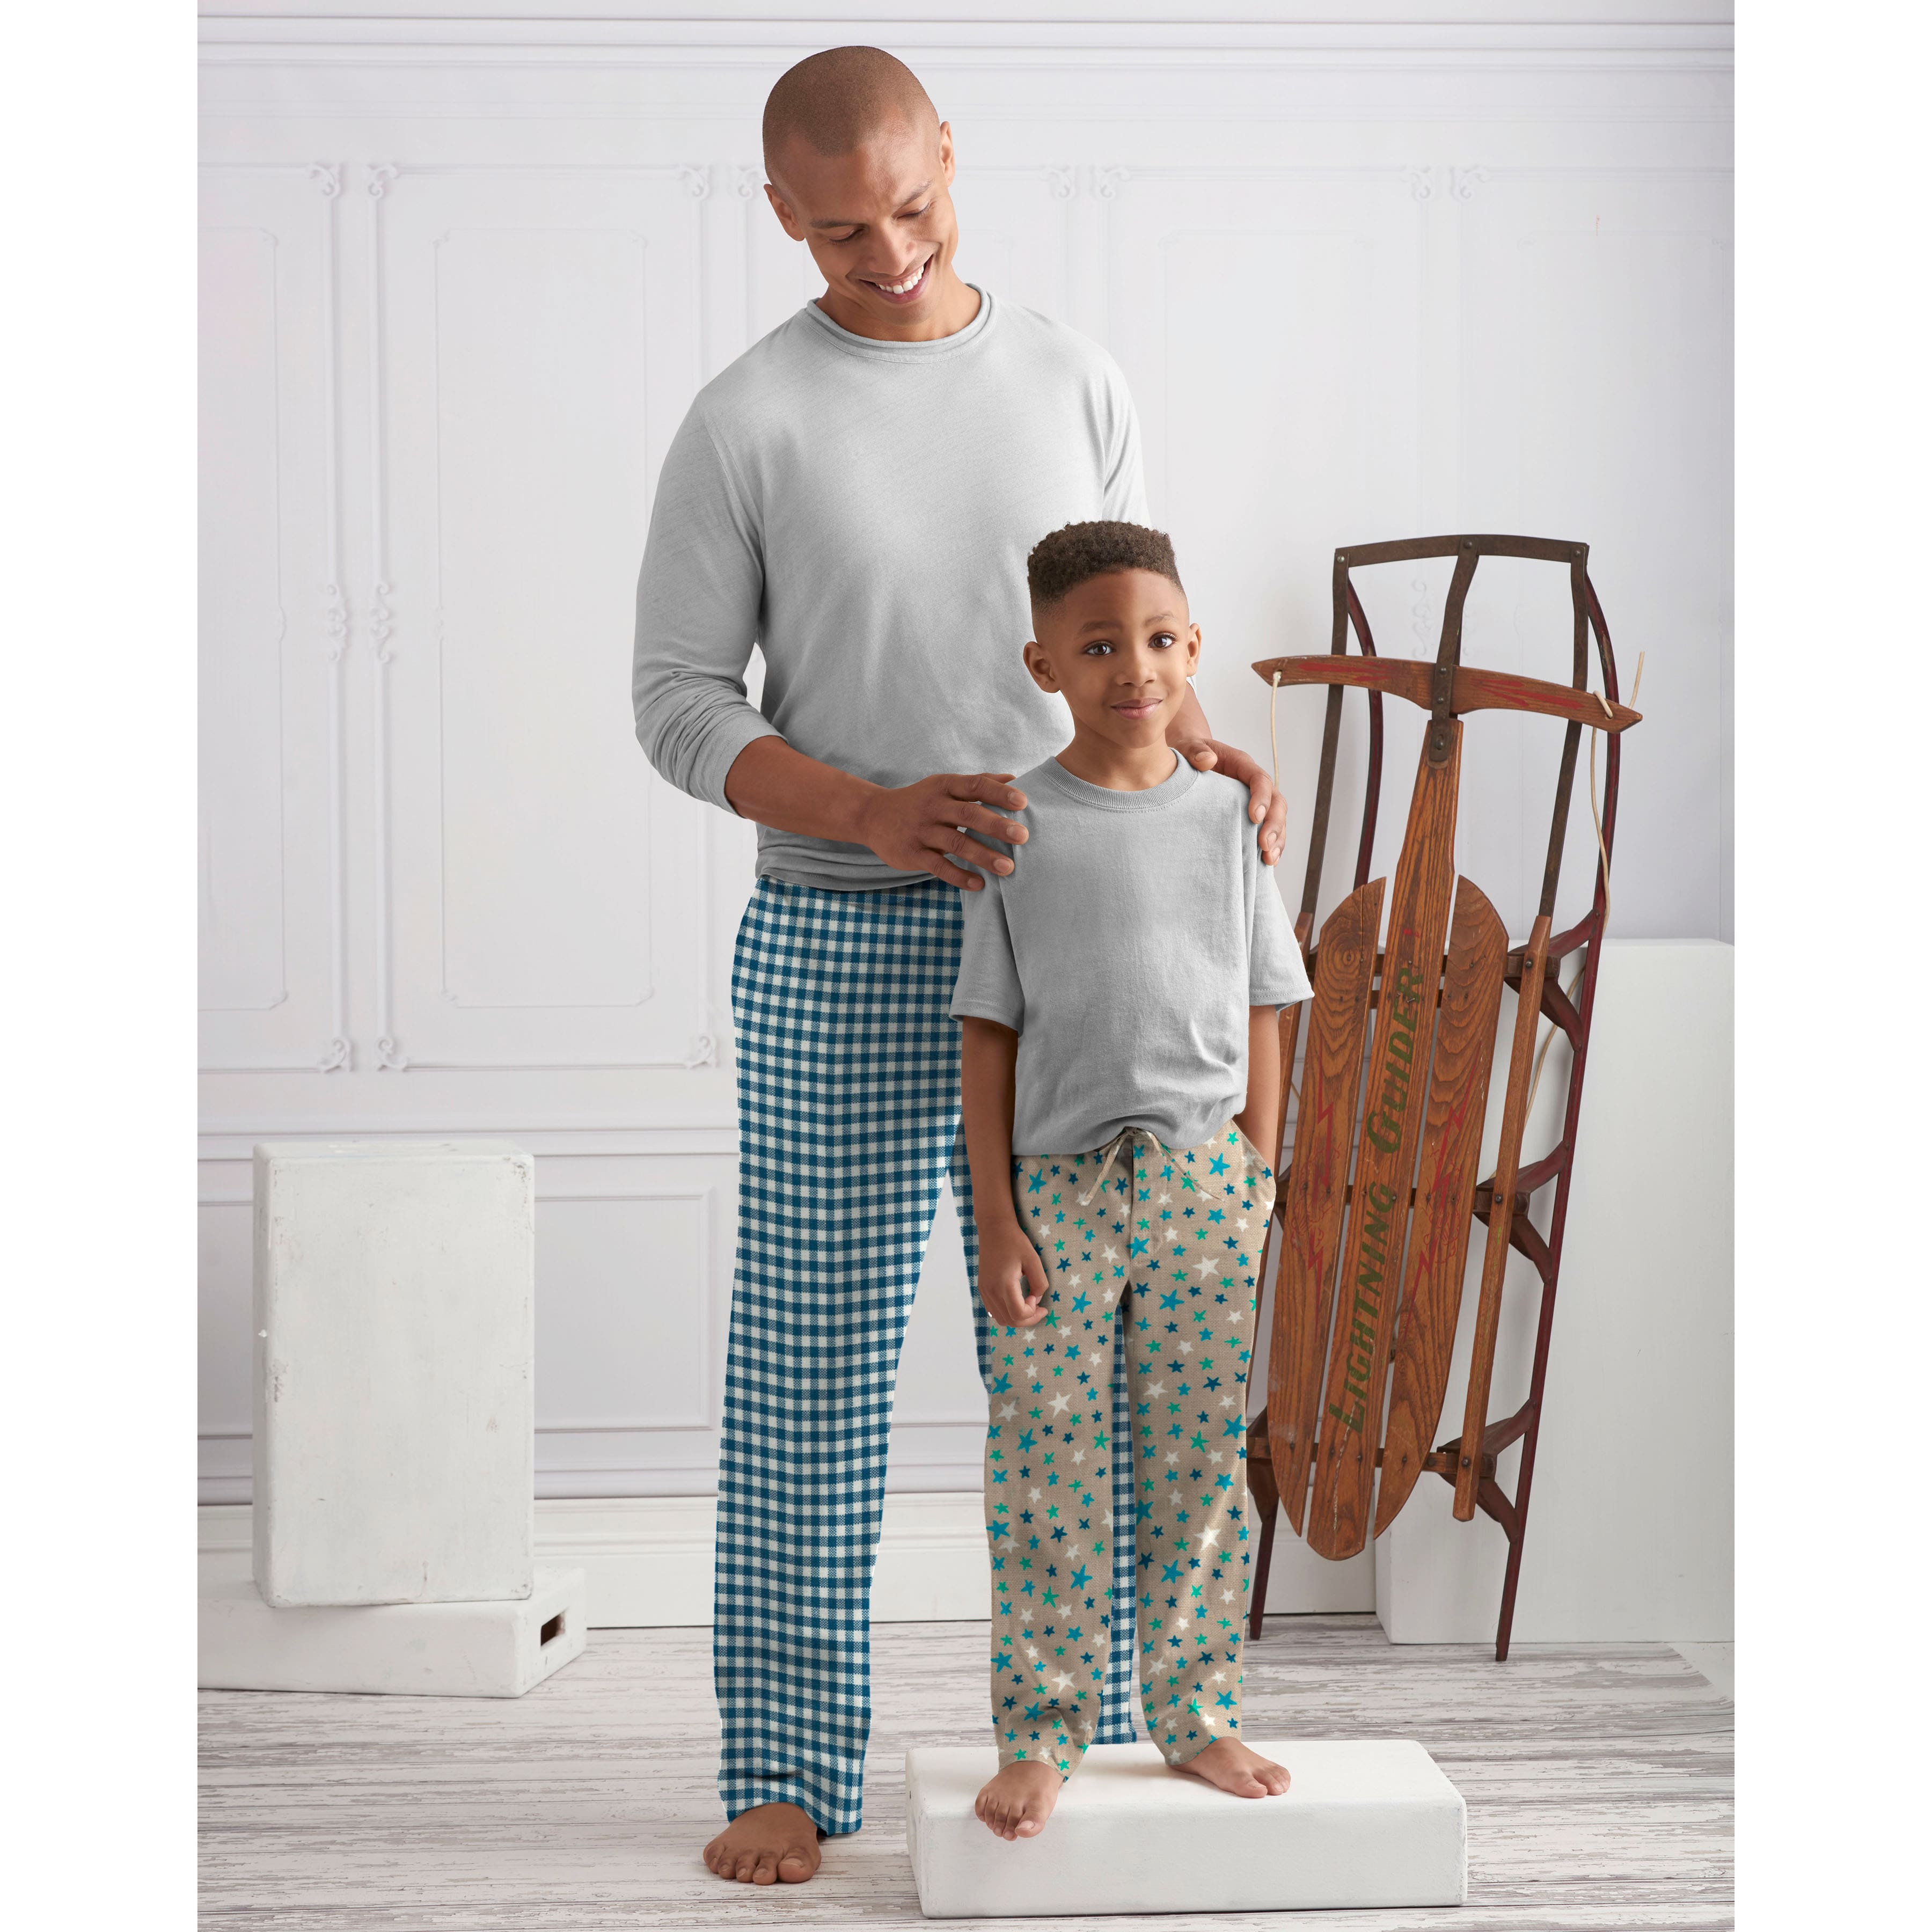 Amazon.com: Simplicity 1605 Boy's And Men's Pajama Sewing Patterns, Men's  Sizes S-XL and Youth Sizes S-L : Arts, Crafts & Sewing